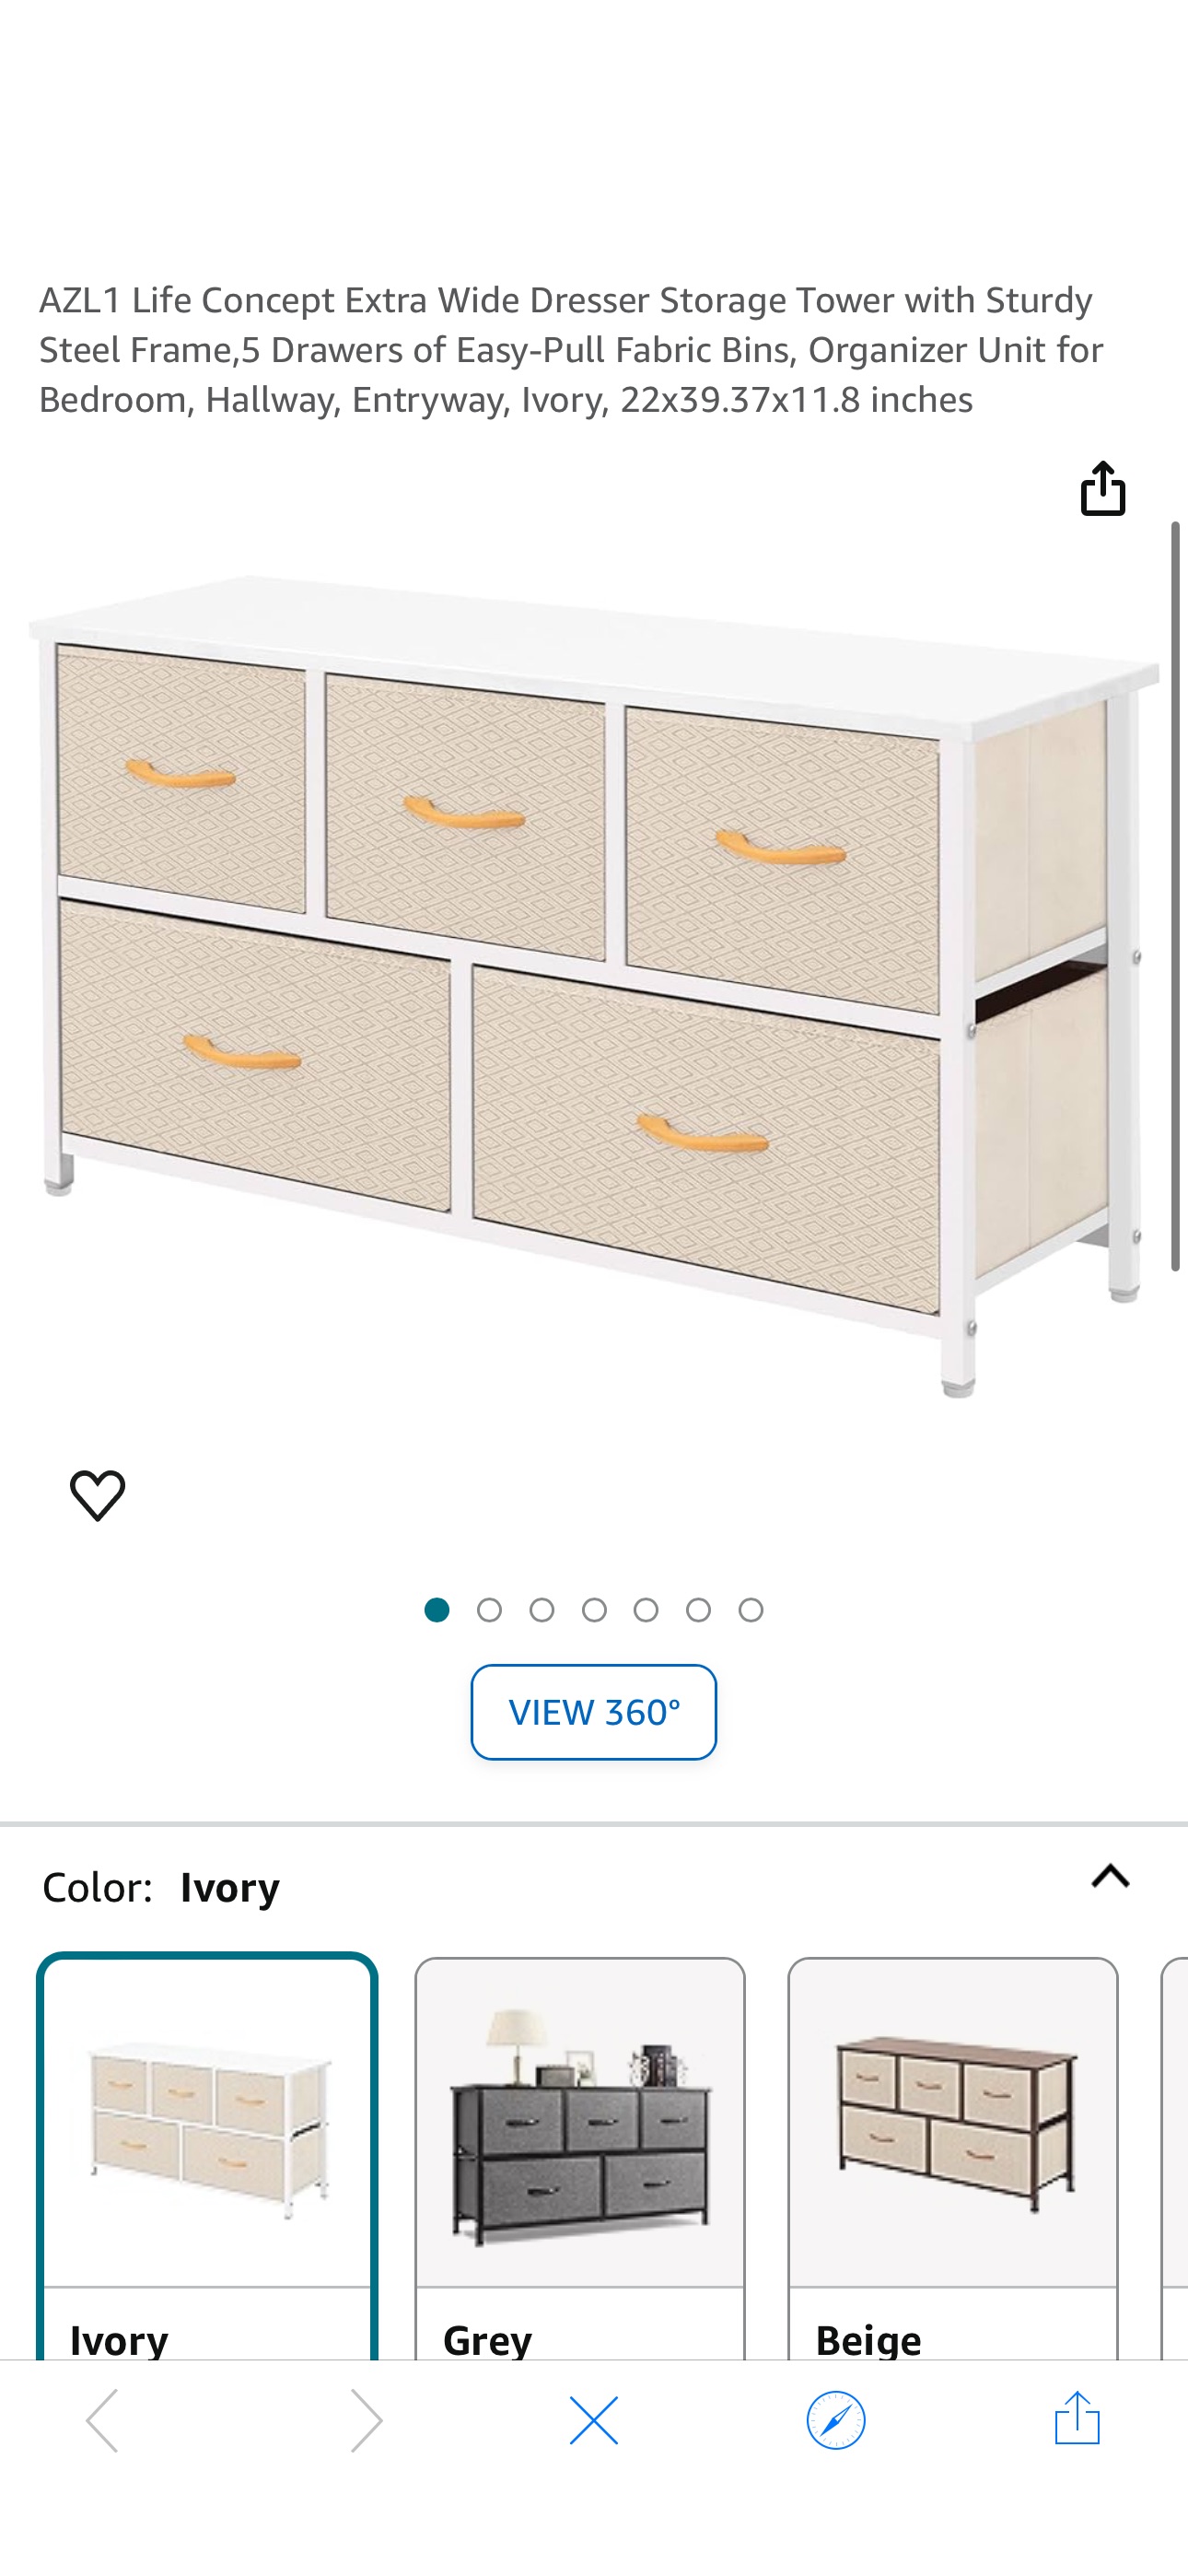 Amazon.com: AZL1 Life Concept Extra Wide Dresser Storage Tower with Sturdy Steel Frame,5 Drawers of Easy-Pull Fabric Bins, Organizer Unit for Bedroom, Hallway, Entryway, Ivory, 22x39.37x11.8 inches : 